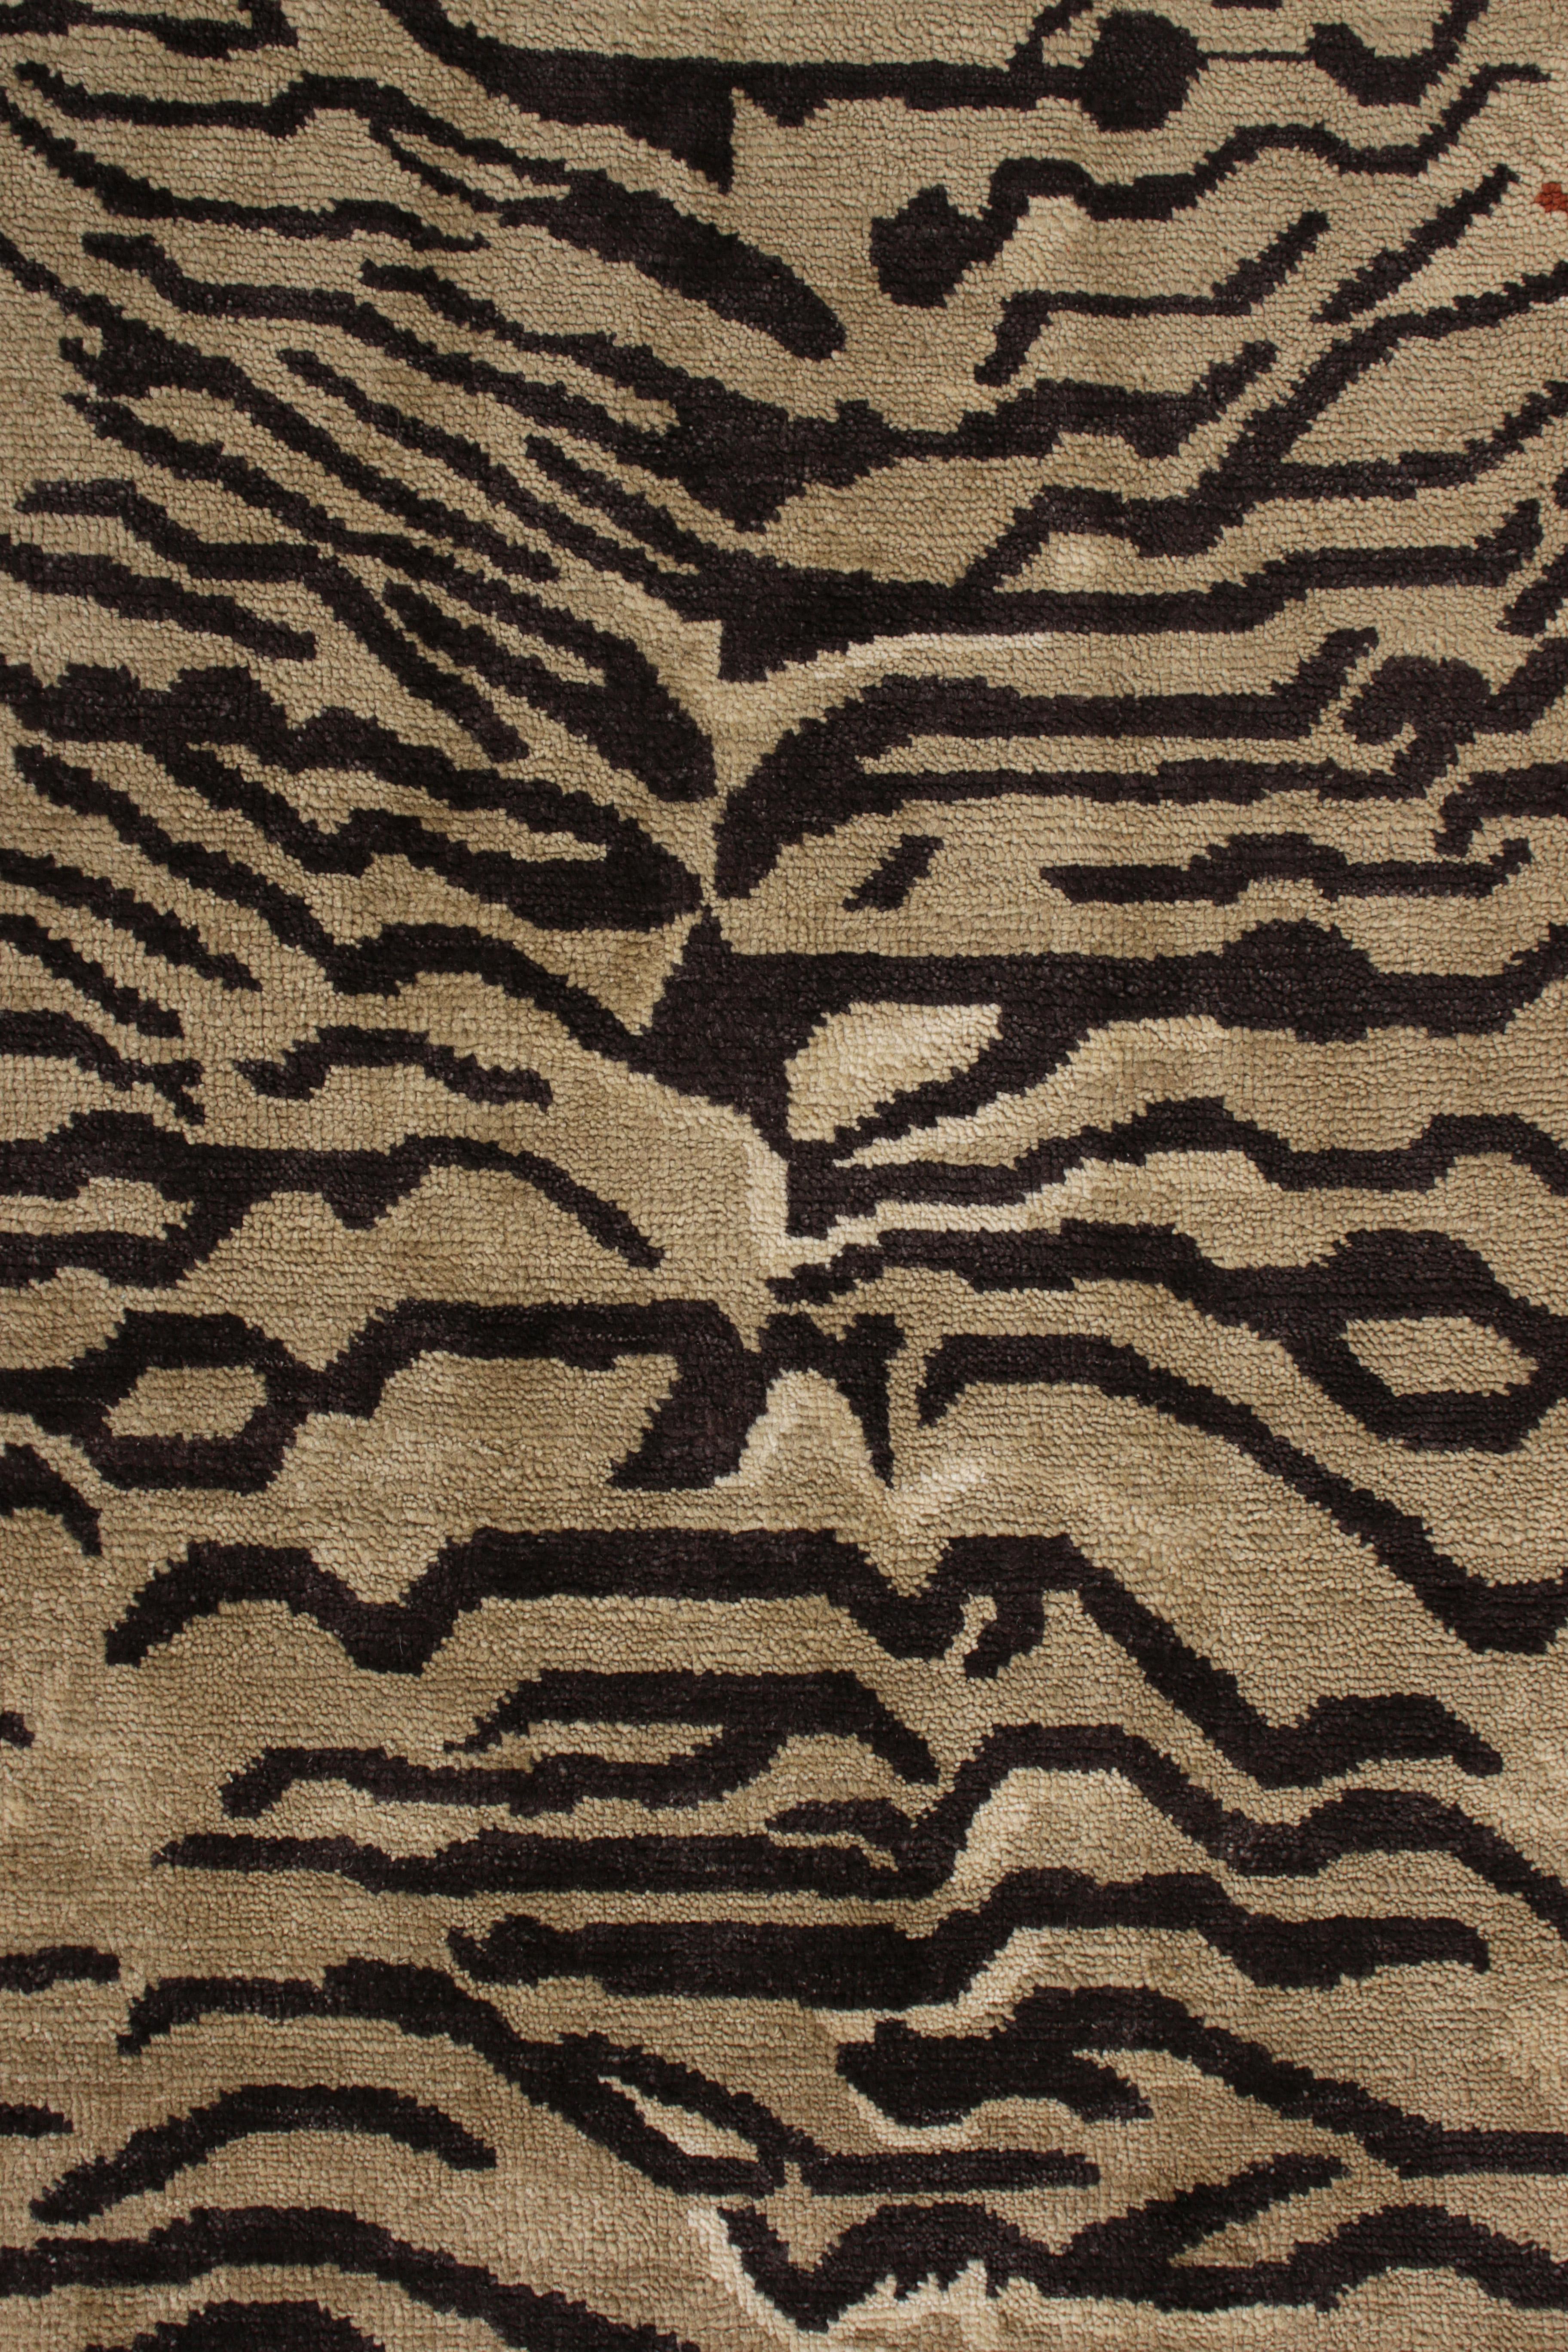 Tribal Rug & Kilim's Hand Knotted Tiger Rug in Beige Brown Pictorial Pattern